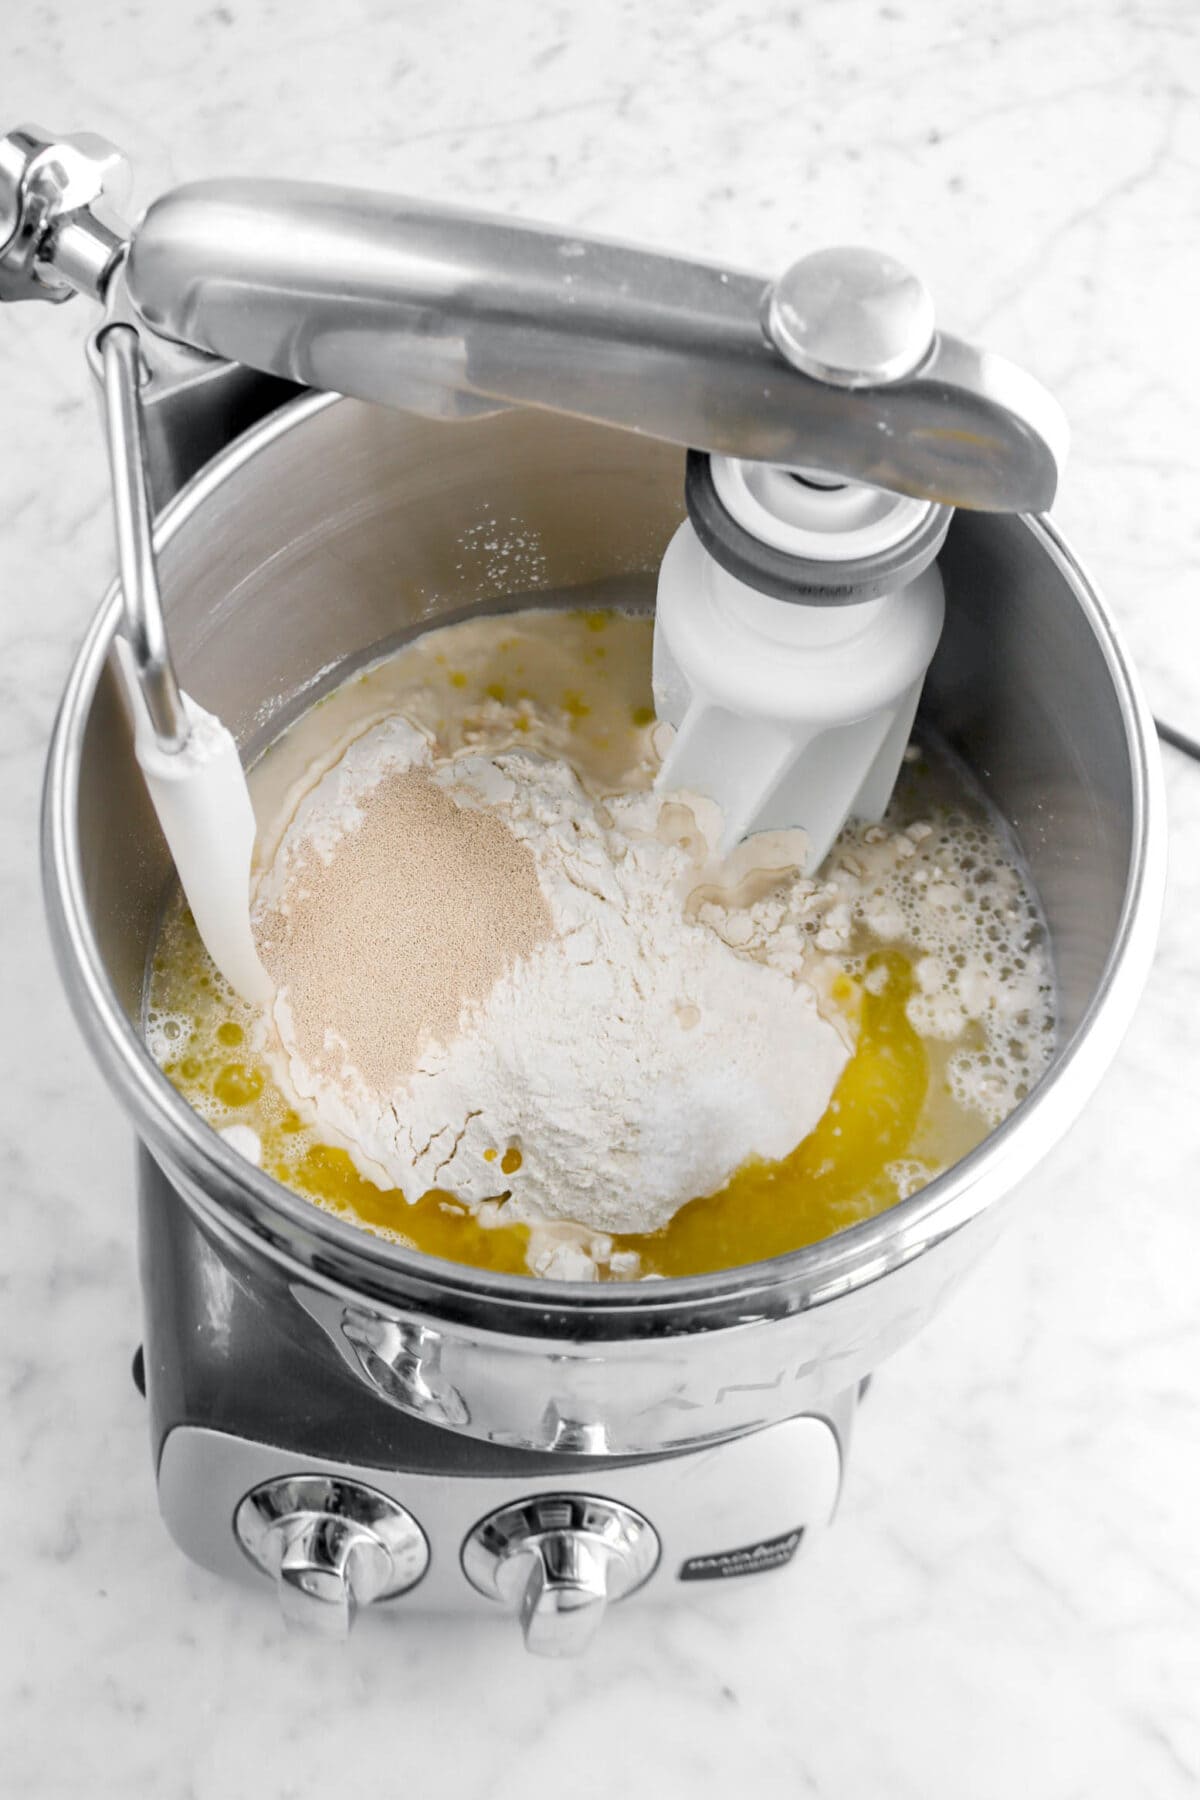 yeast, flour, salt, water, and olive oil in mixer